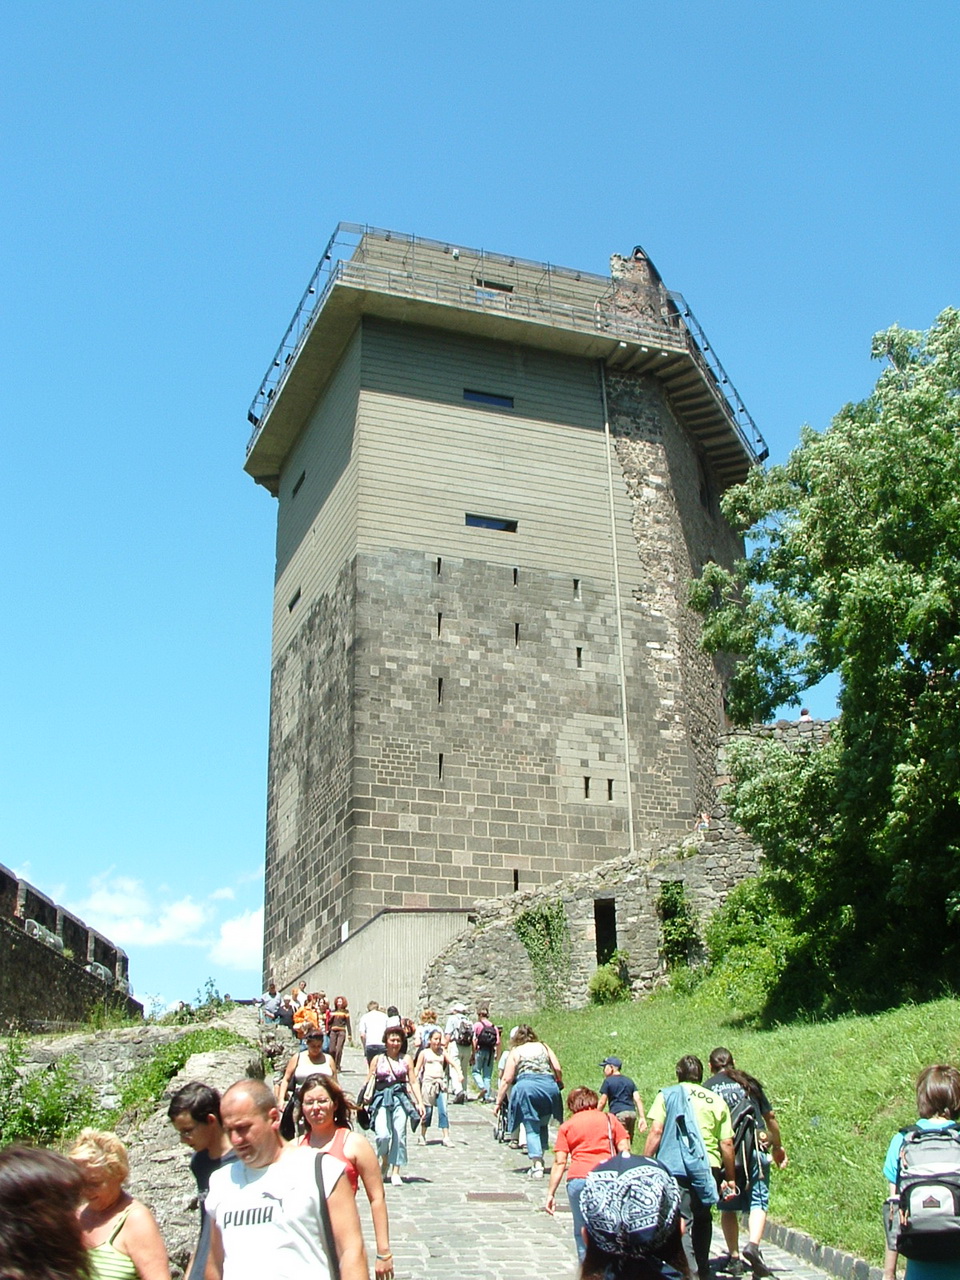 On the steep access road of the Salamon Tower